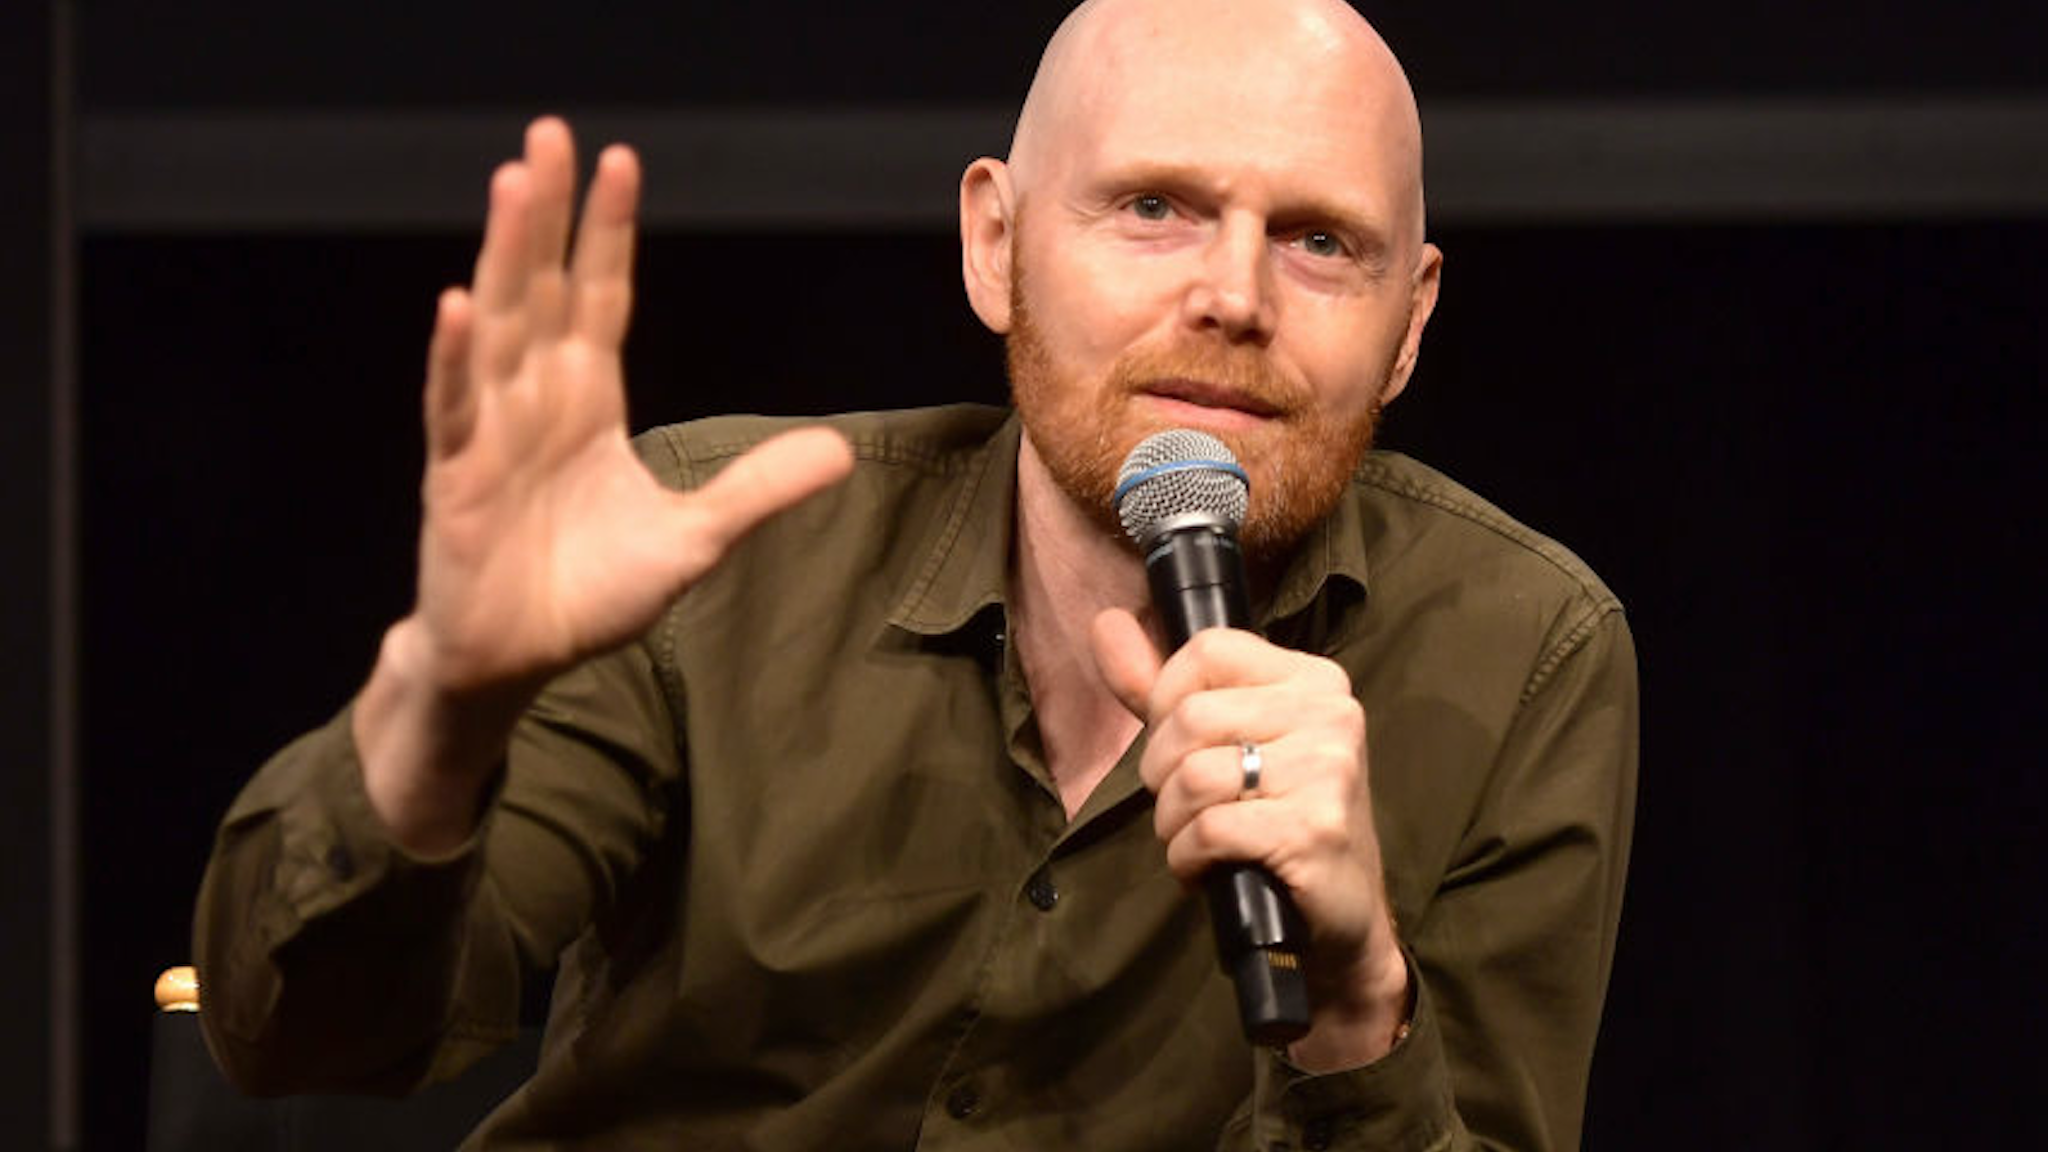 HOLLYWOOD, CALIFORNIA - APRIL 20: Bill Burr speaks onstage at the Netflix Adult Animation Q&A and Reception on April 20, 2019 in Hollywood, California.